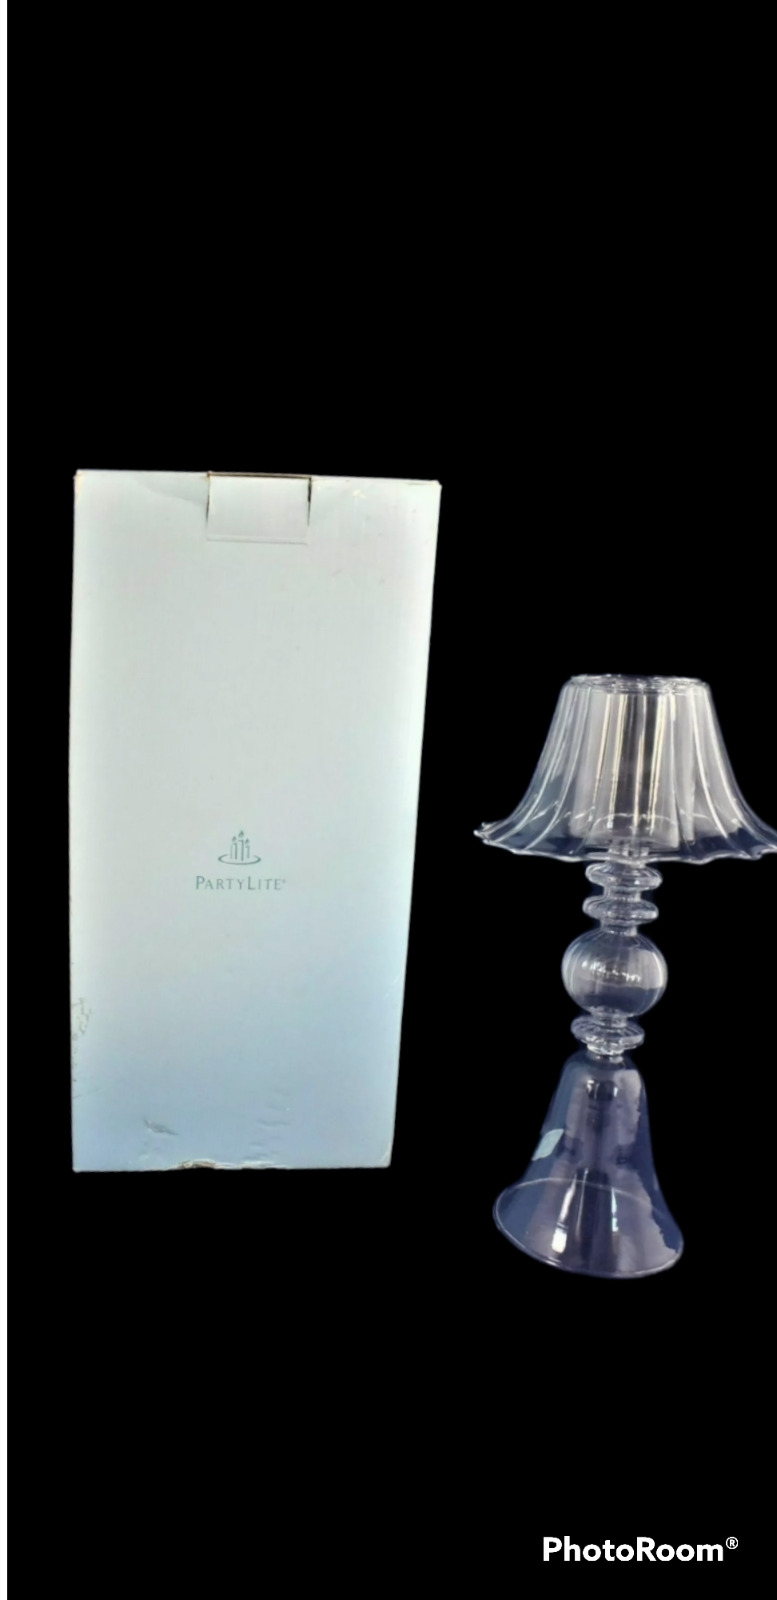 PartyLite Classic Style Tealight Candle Lamp  P90527